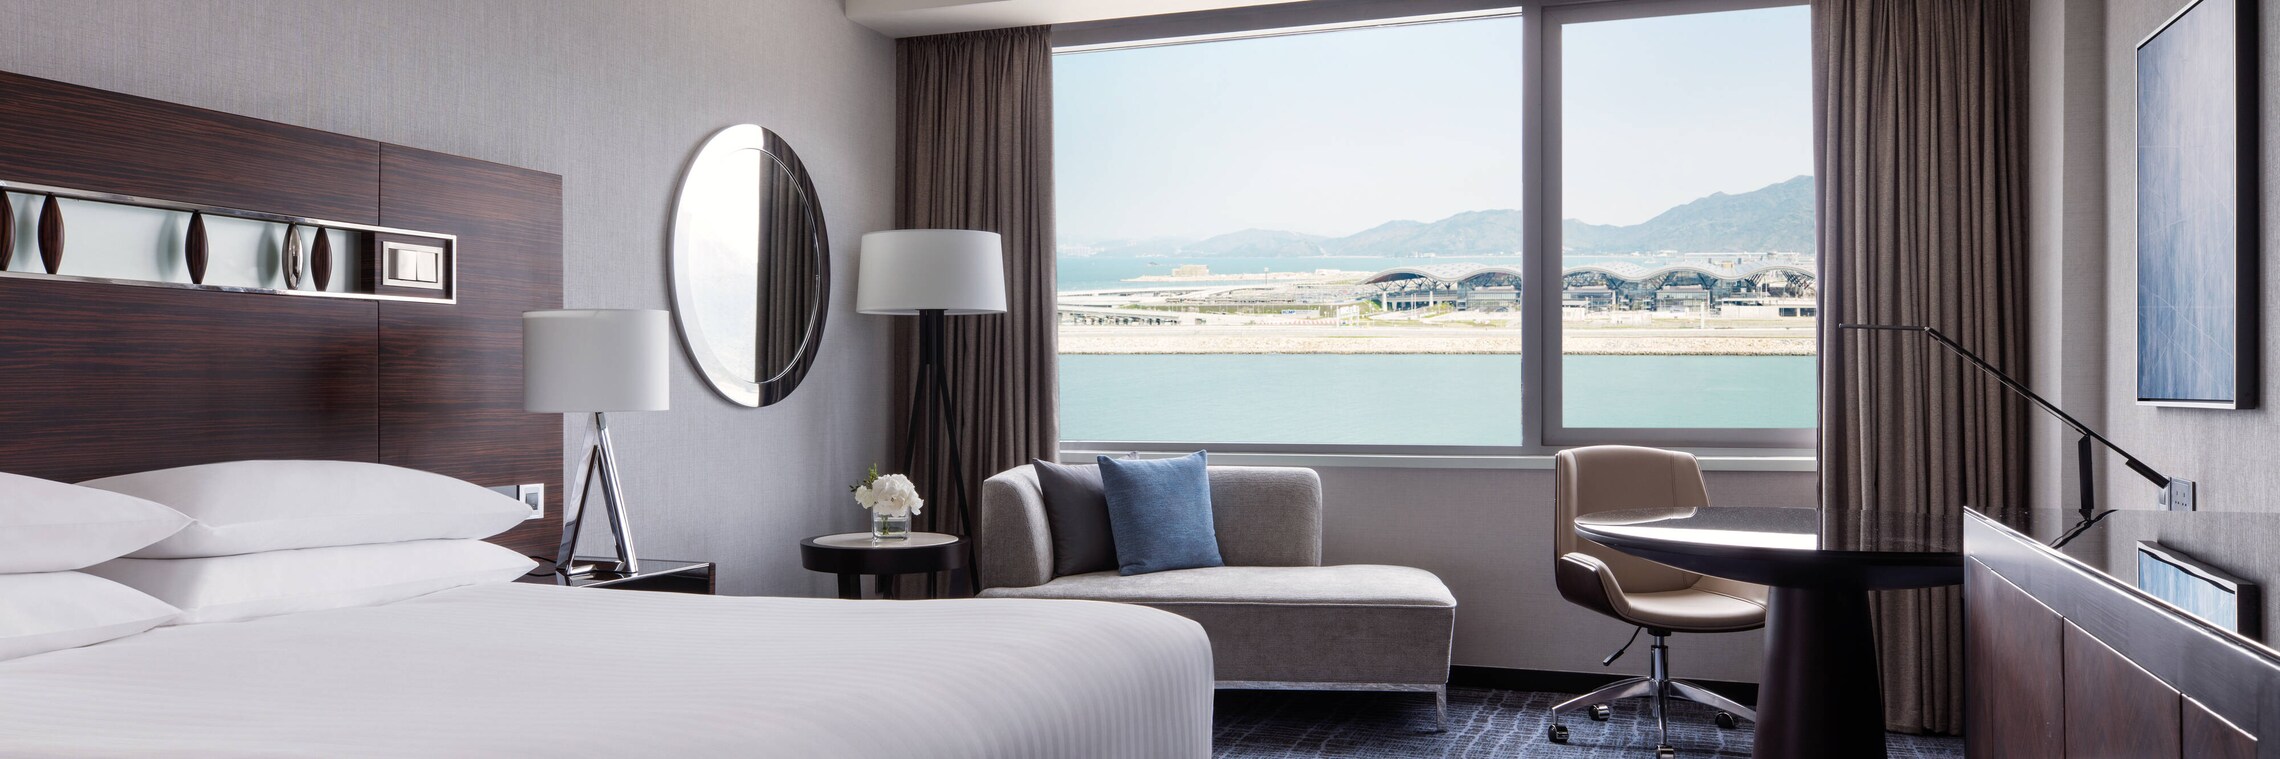 King Guest Room - Sea View